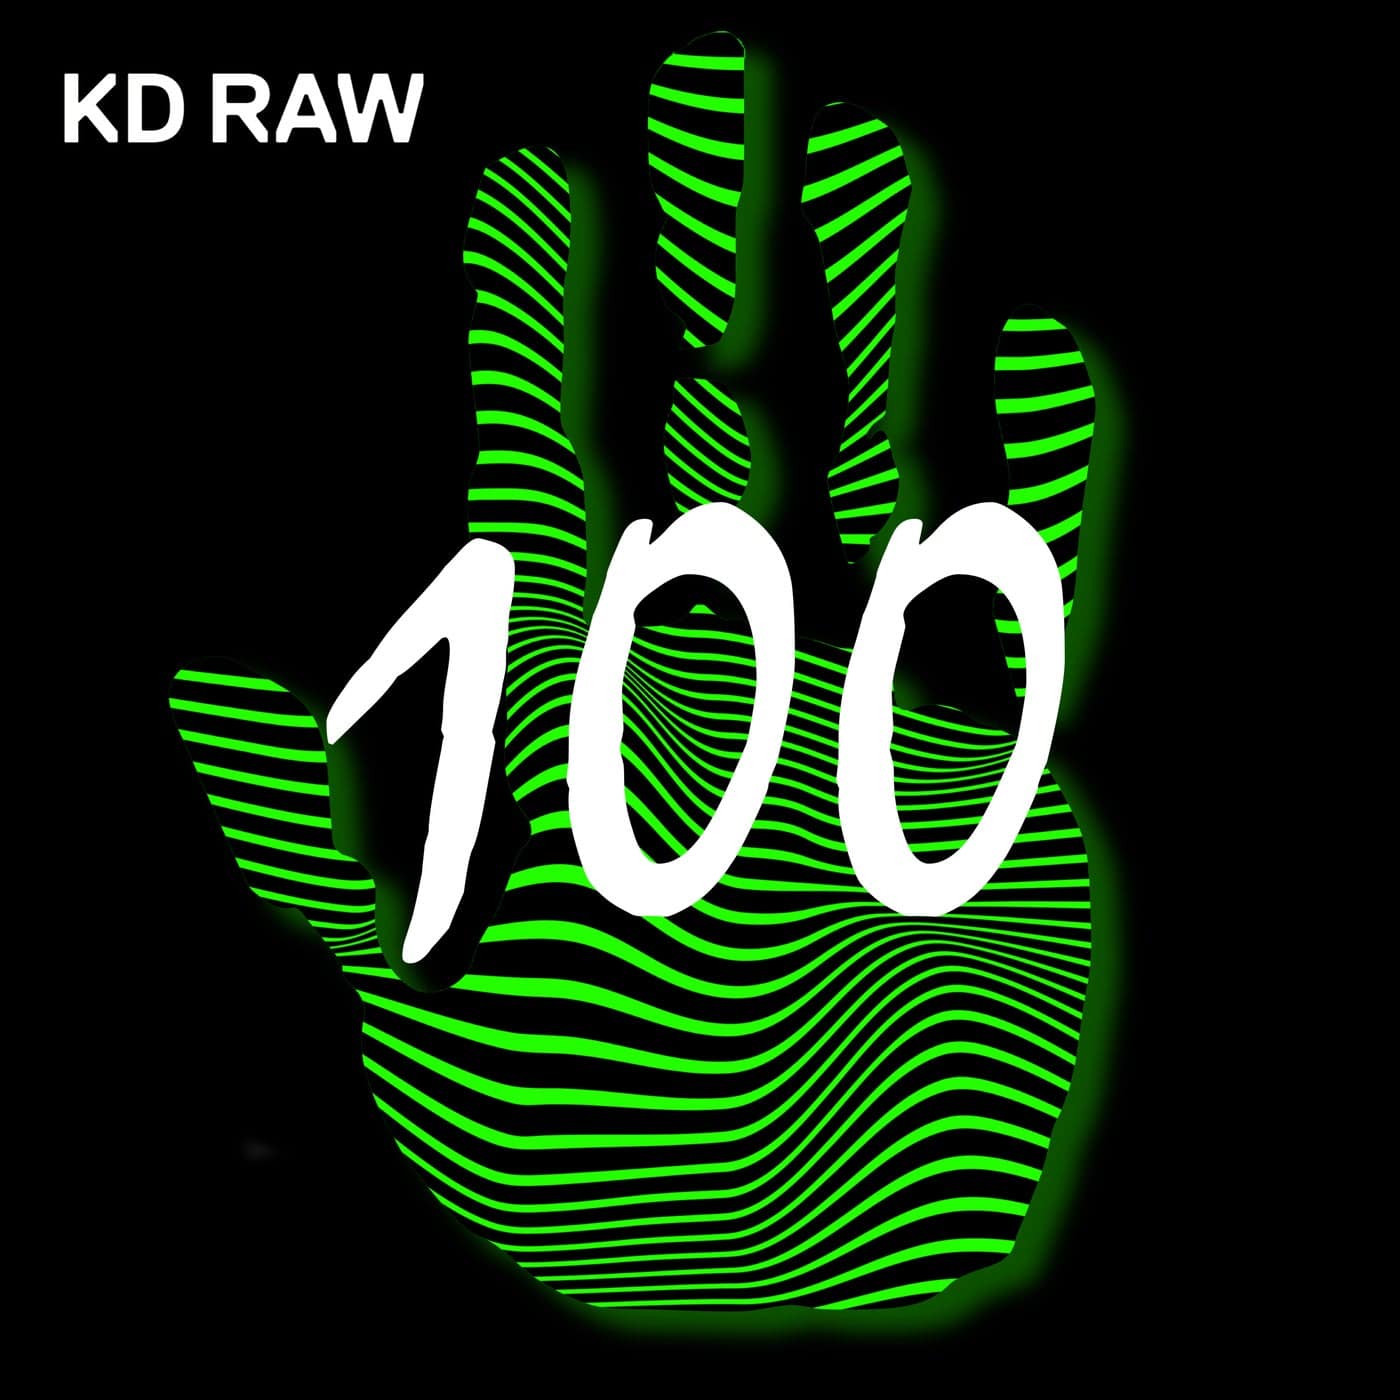 Release Cover: VA - KD RAW 100 on Electrobuzz